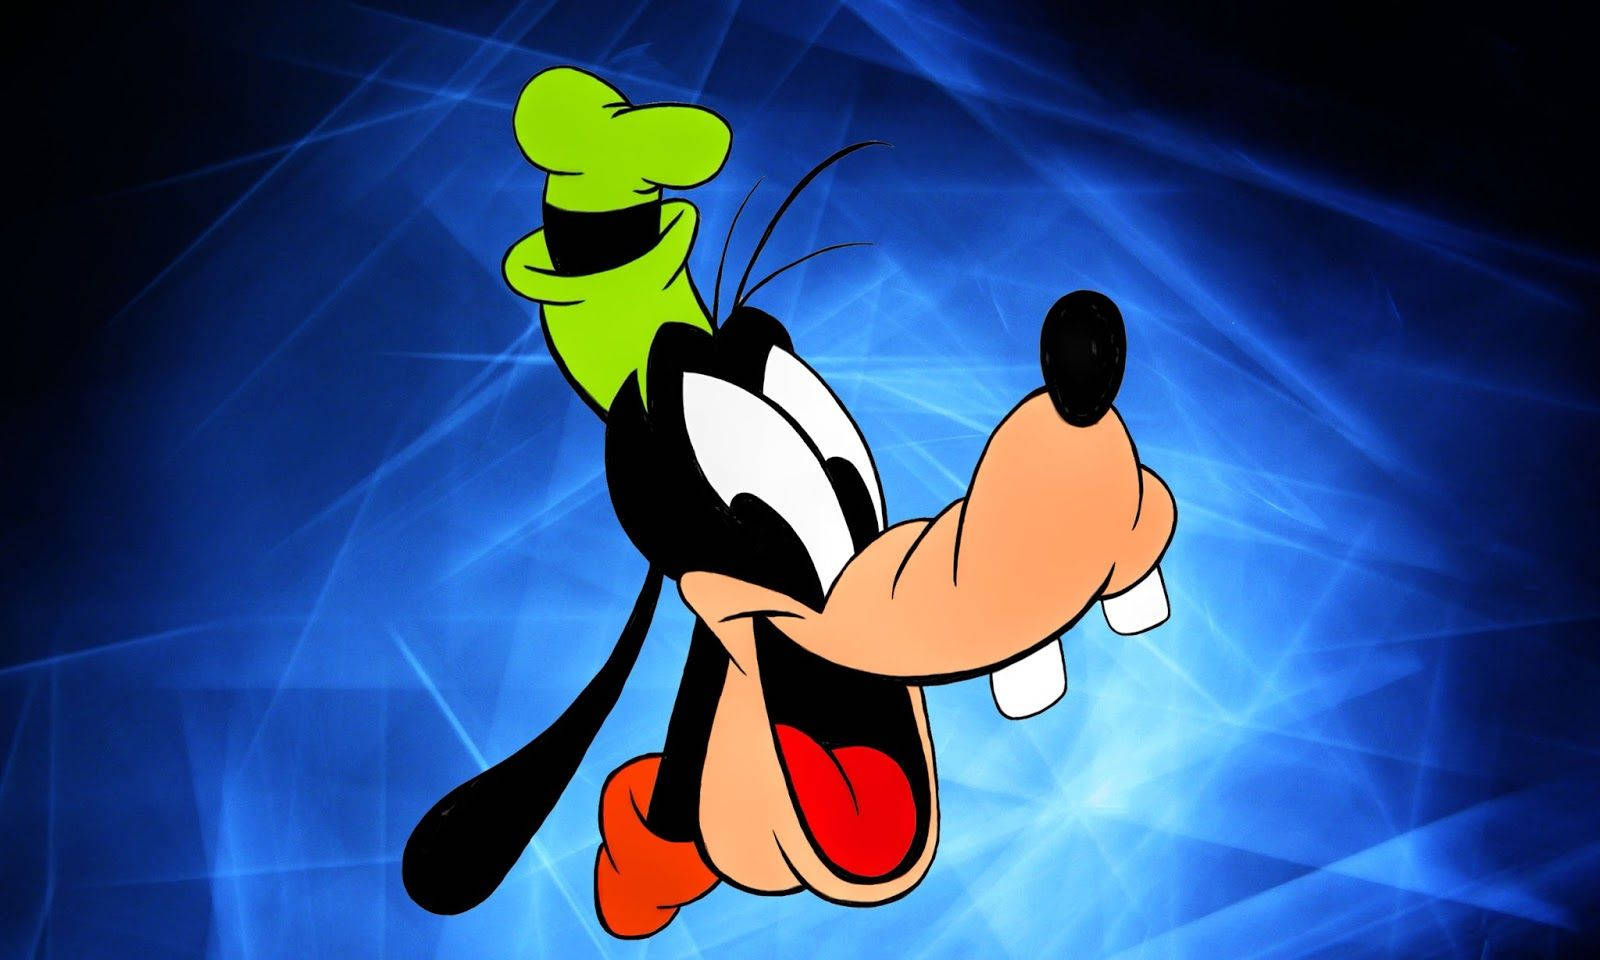 Free Goofy Wallpaper Downloads, [100+] Goofy Wallpapers for FREE |  